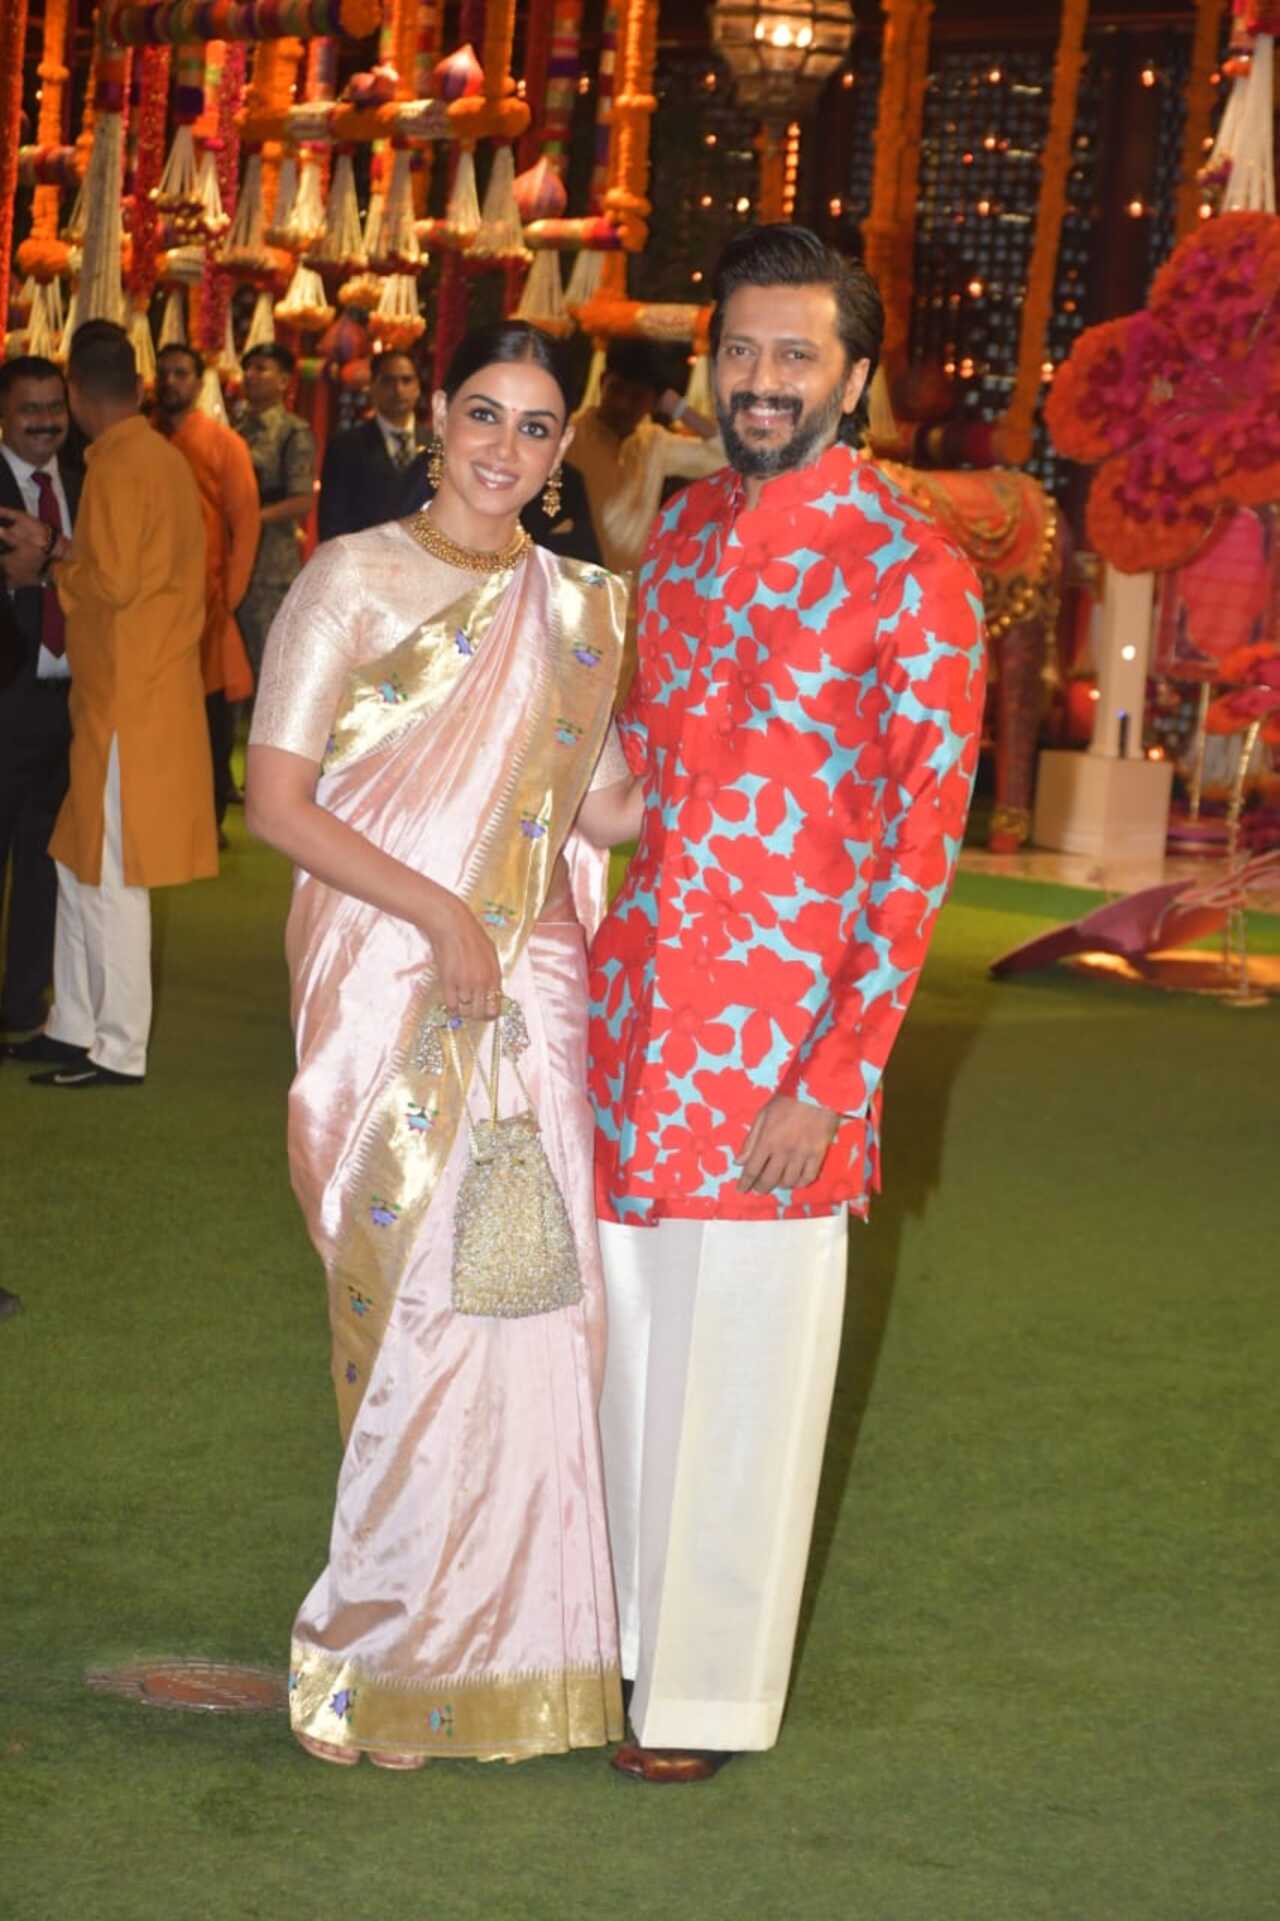 Riteish Deshmukh and Genelia Deshmukh attended the Ganesh Puja at Antilia. They looked lovely in ethnic outfits